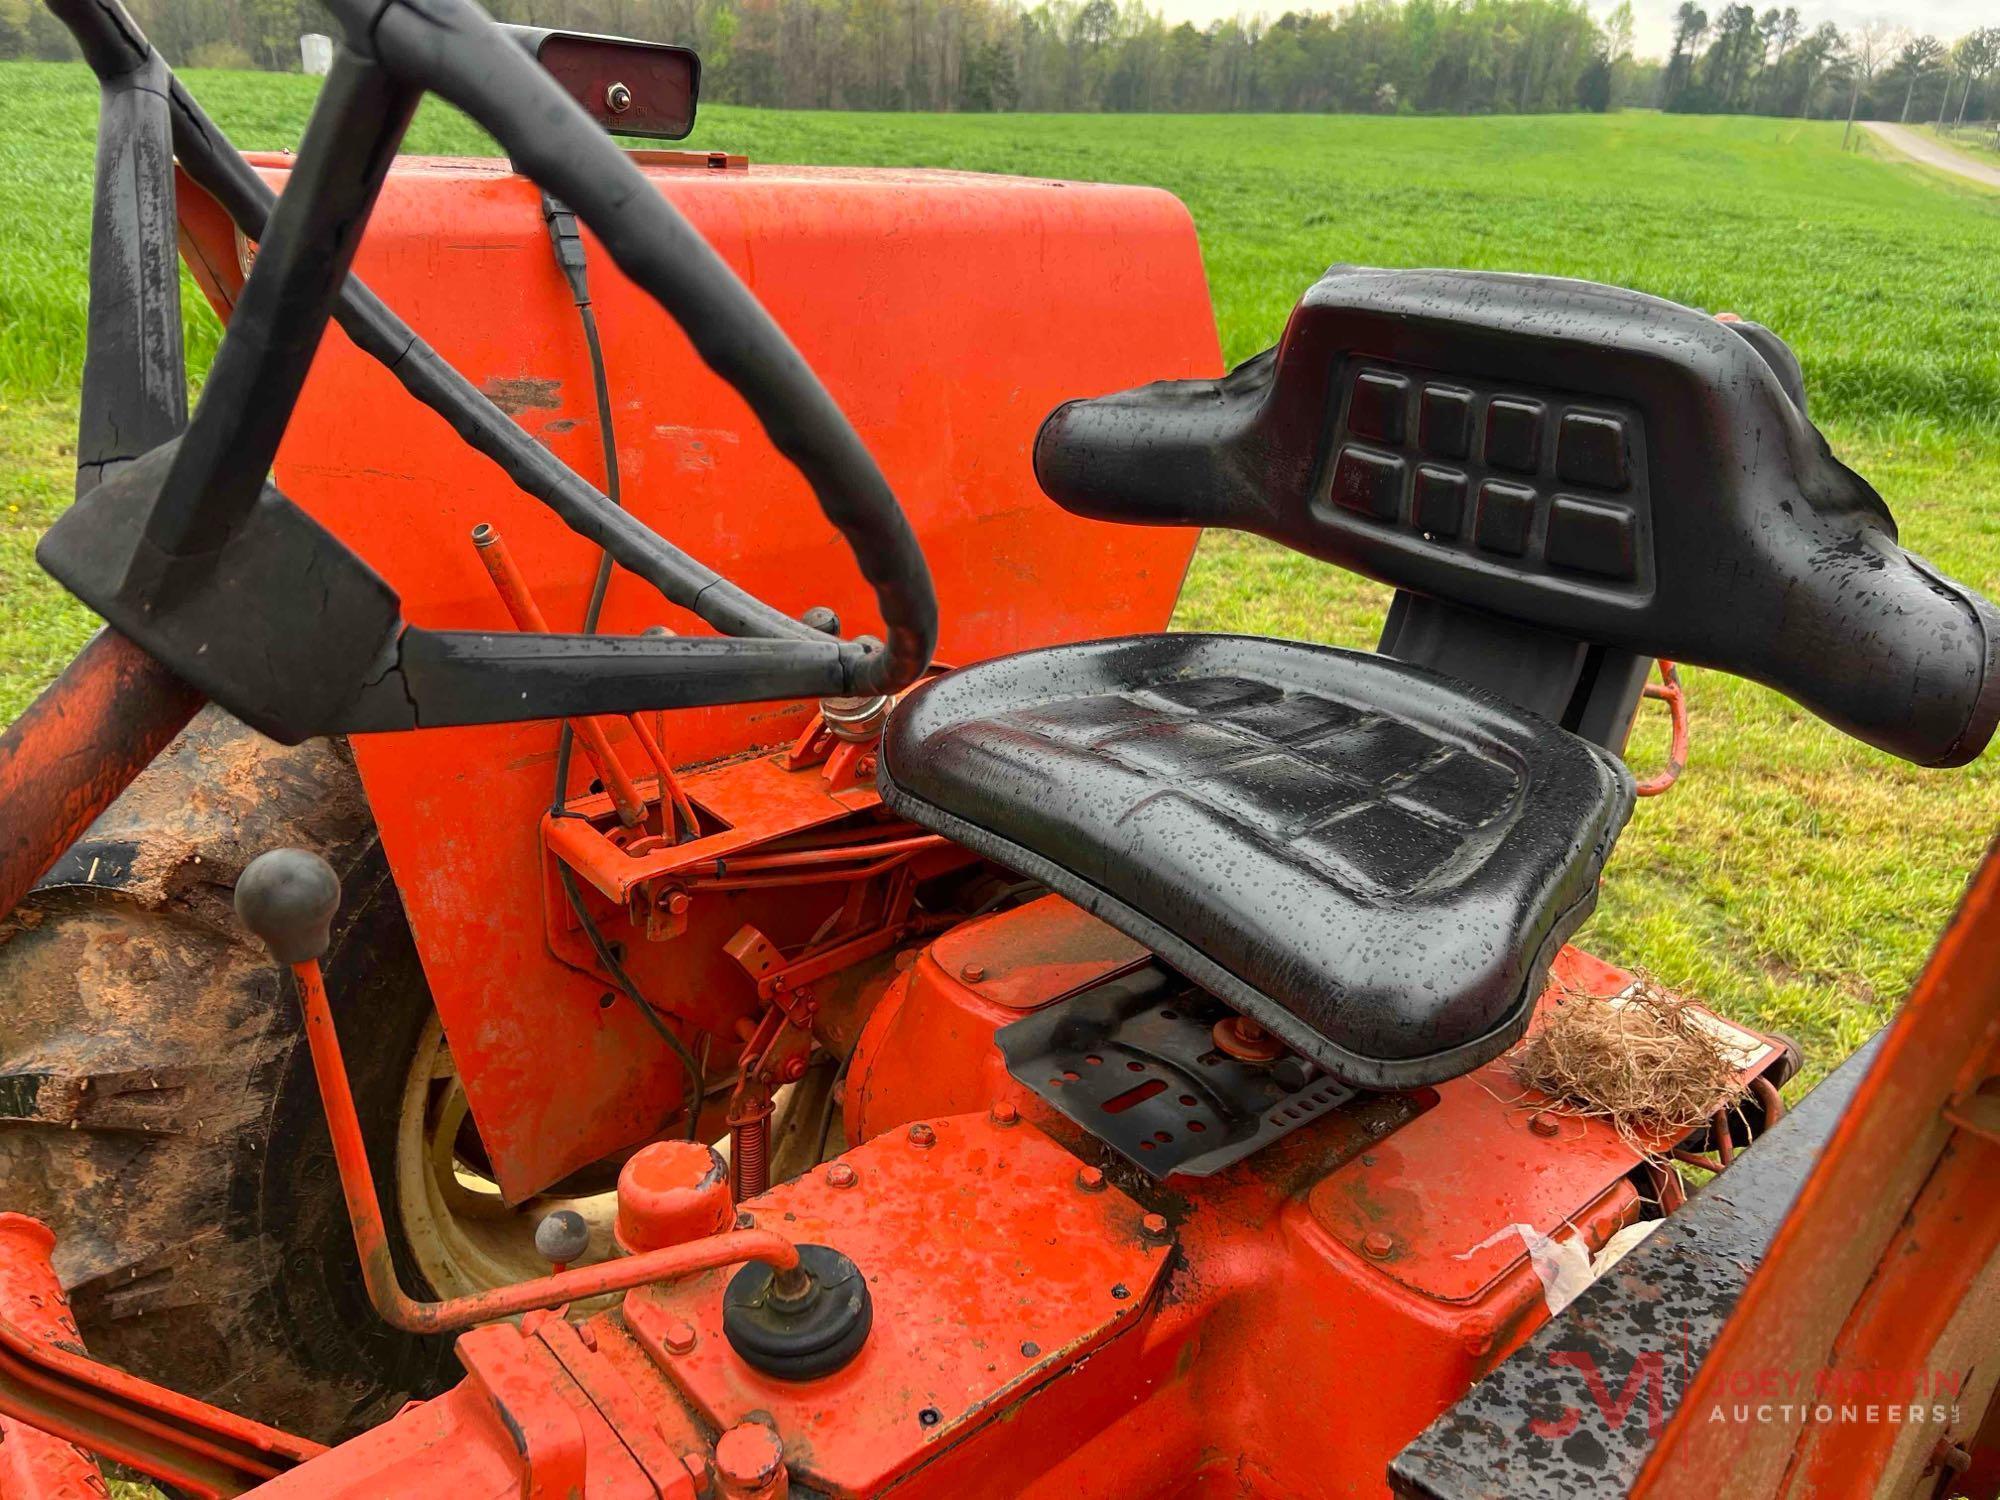 ALLIS-CHALMERS ONE-SEVENTY AG TRACTOR